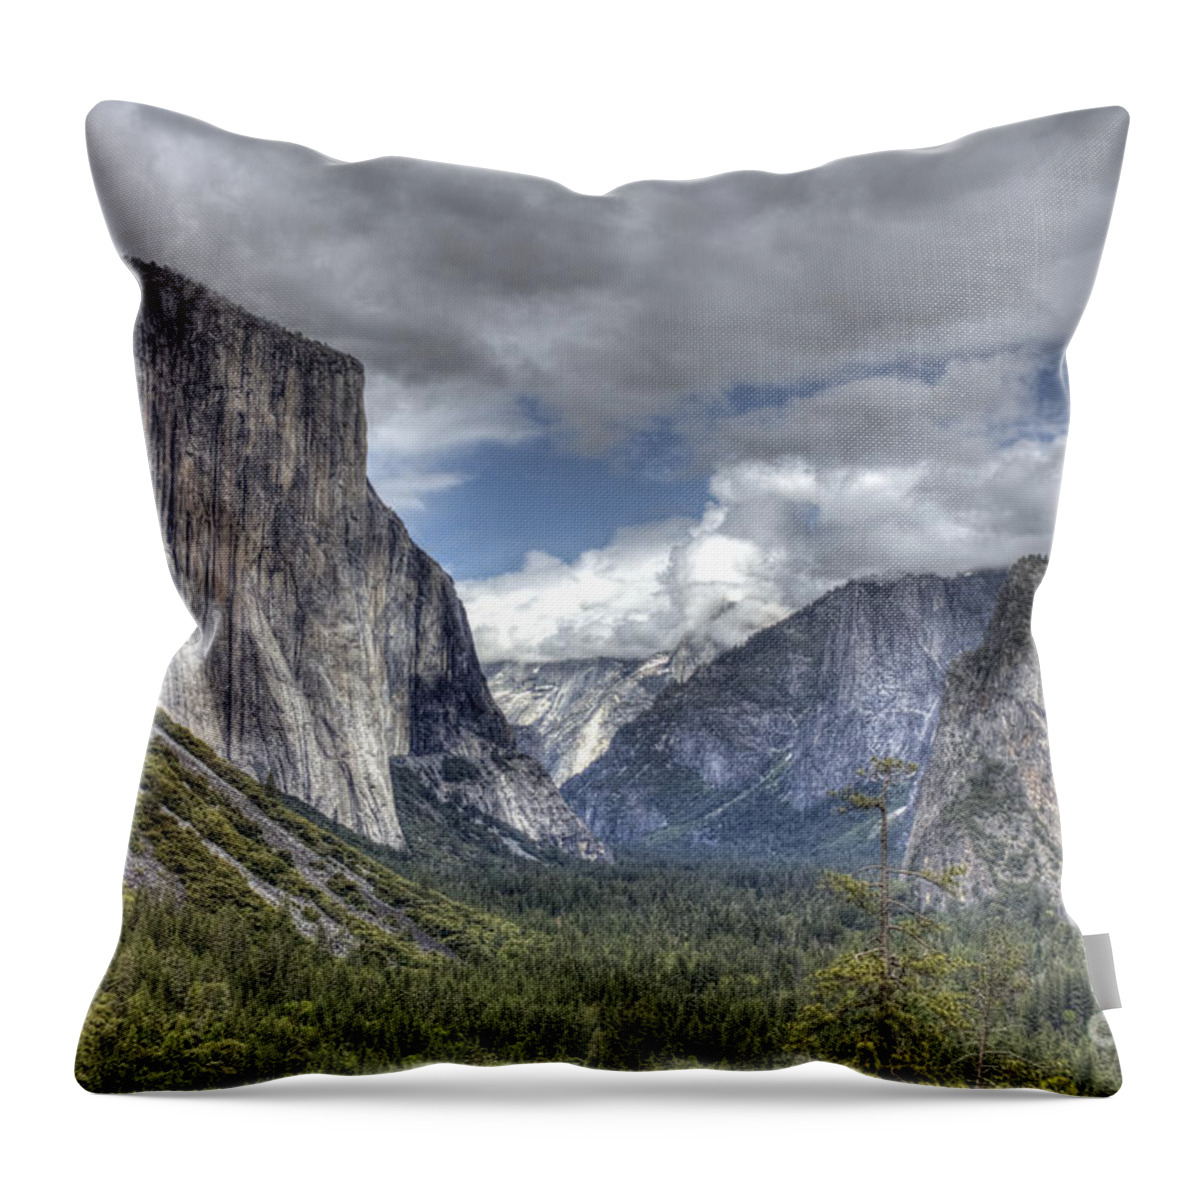 Yosemite National Park Throw Pillow featuring the photograph Summer Storm at Yosemite by ELDavis Photography